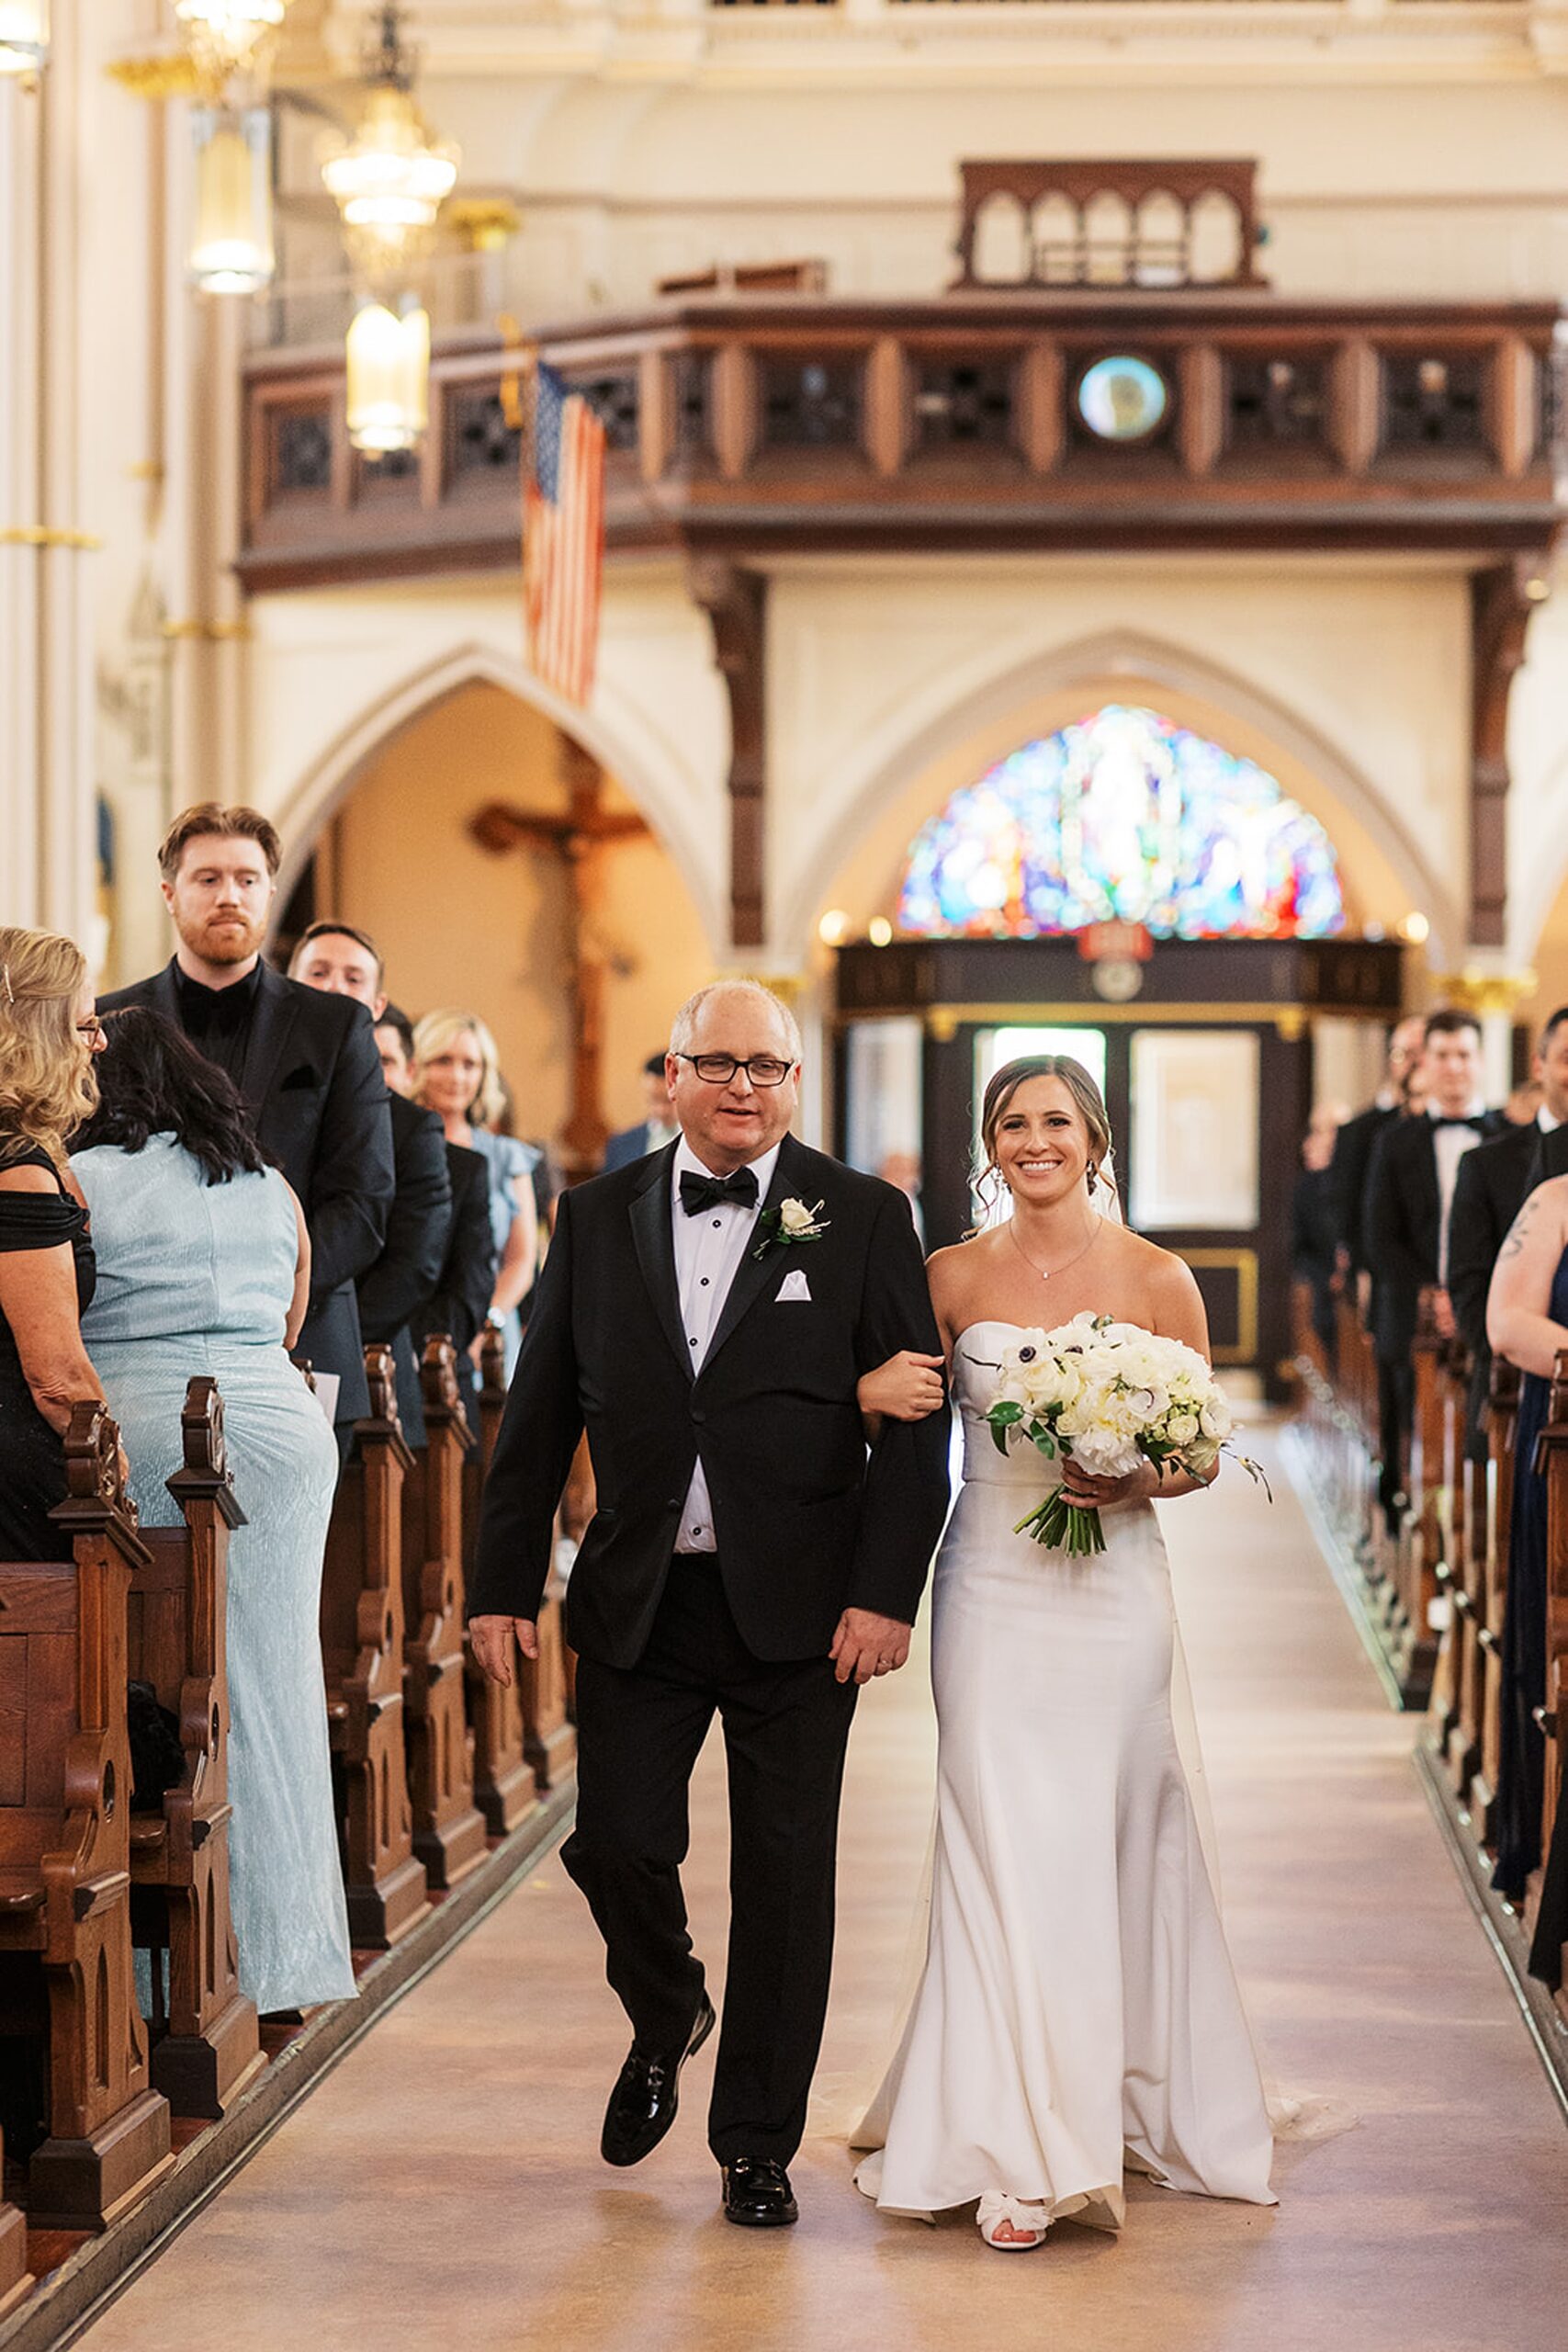 A father walks his daughter down the aisle of a church for her wedding